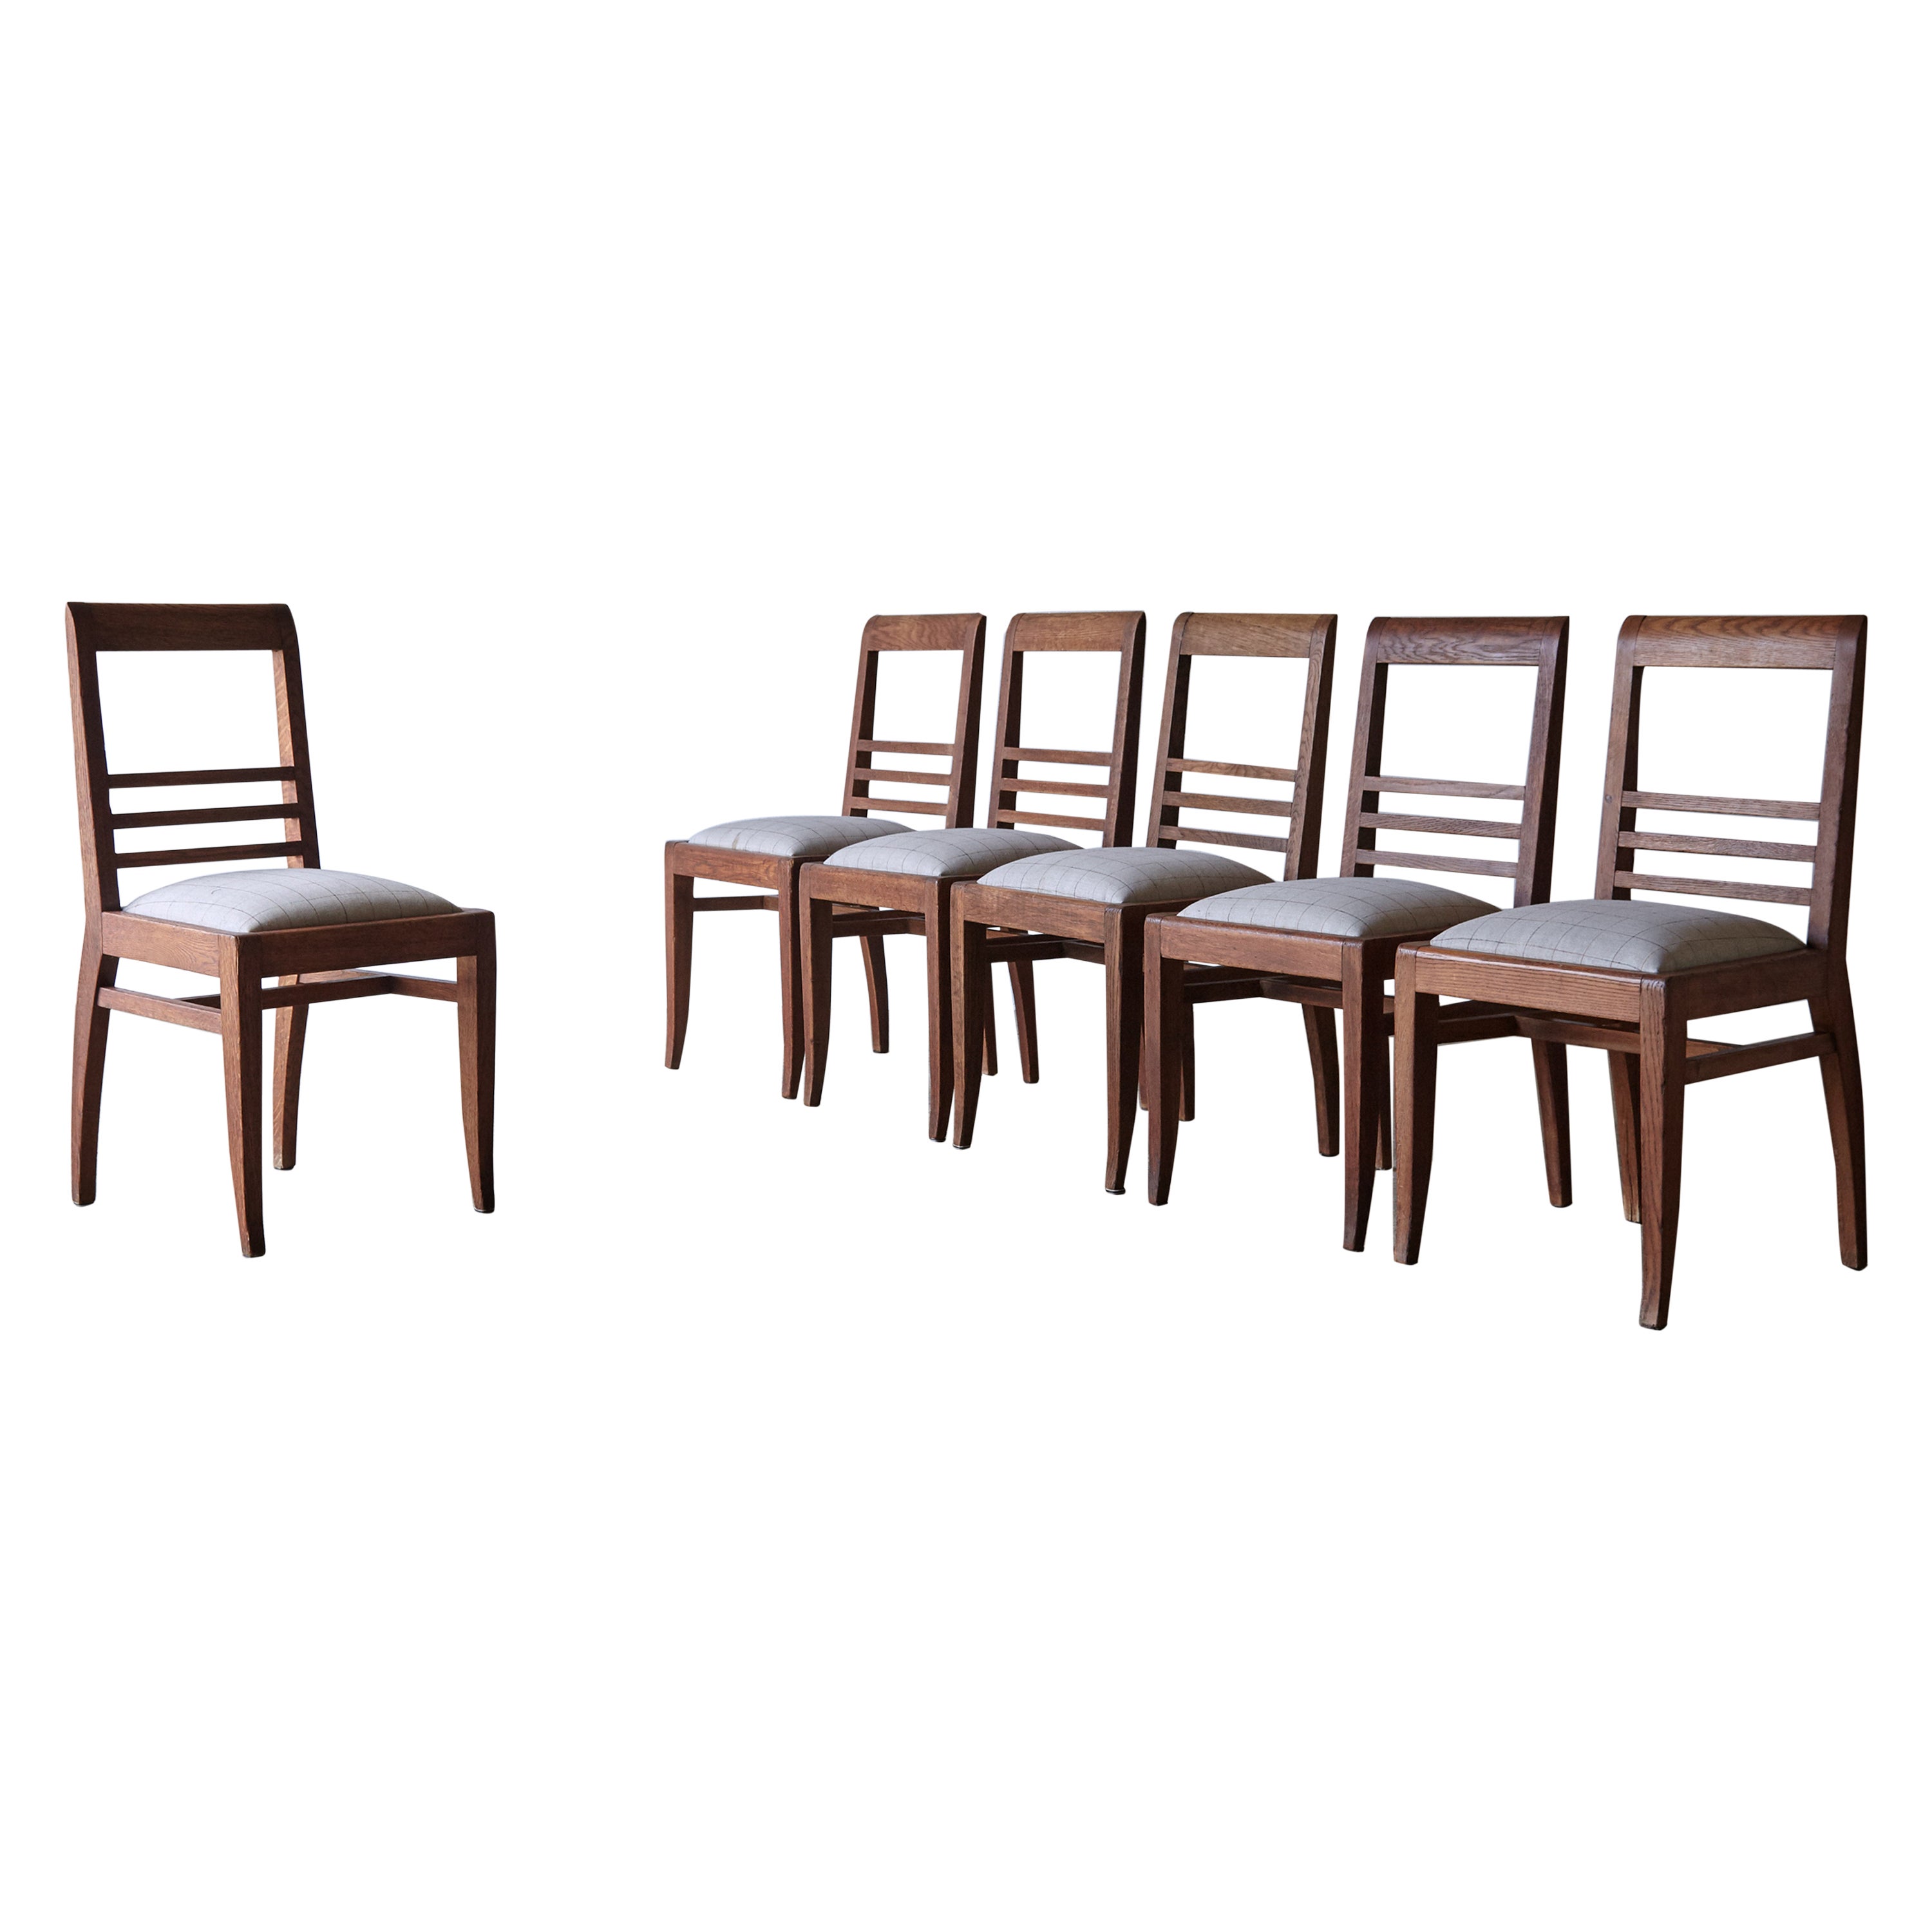 Rare Set of 6 Michel Dufet 'Duffet' Dining Chairs, 1950s, France For Sale